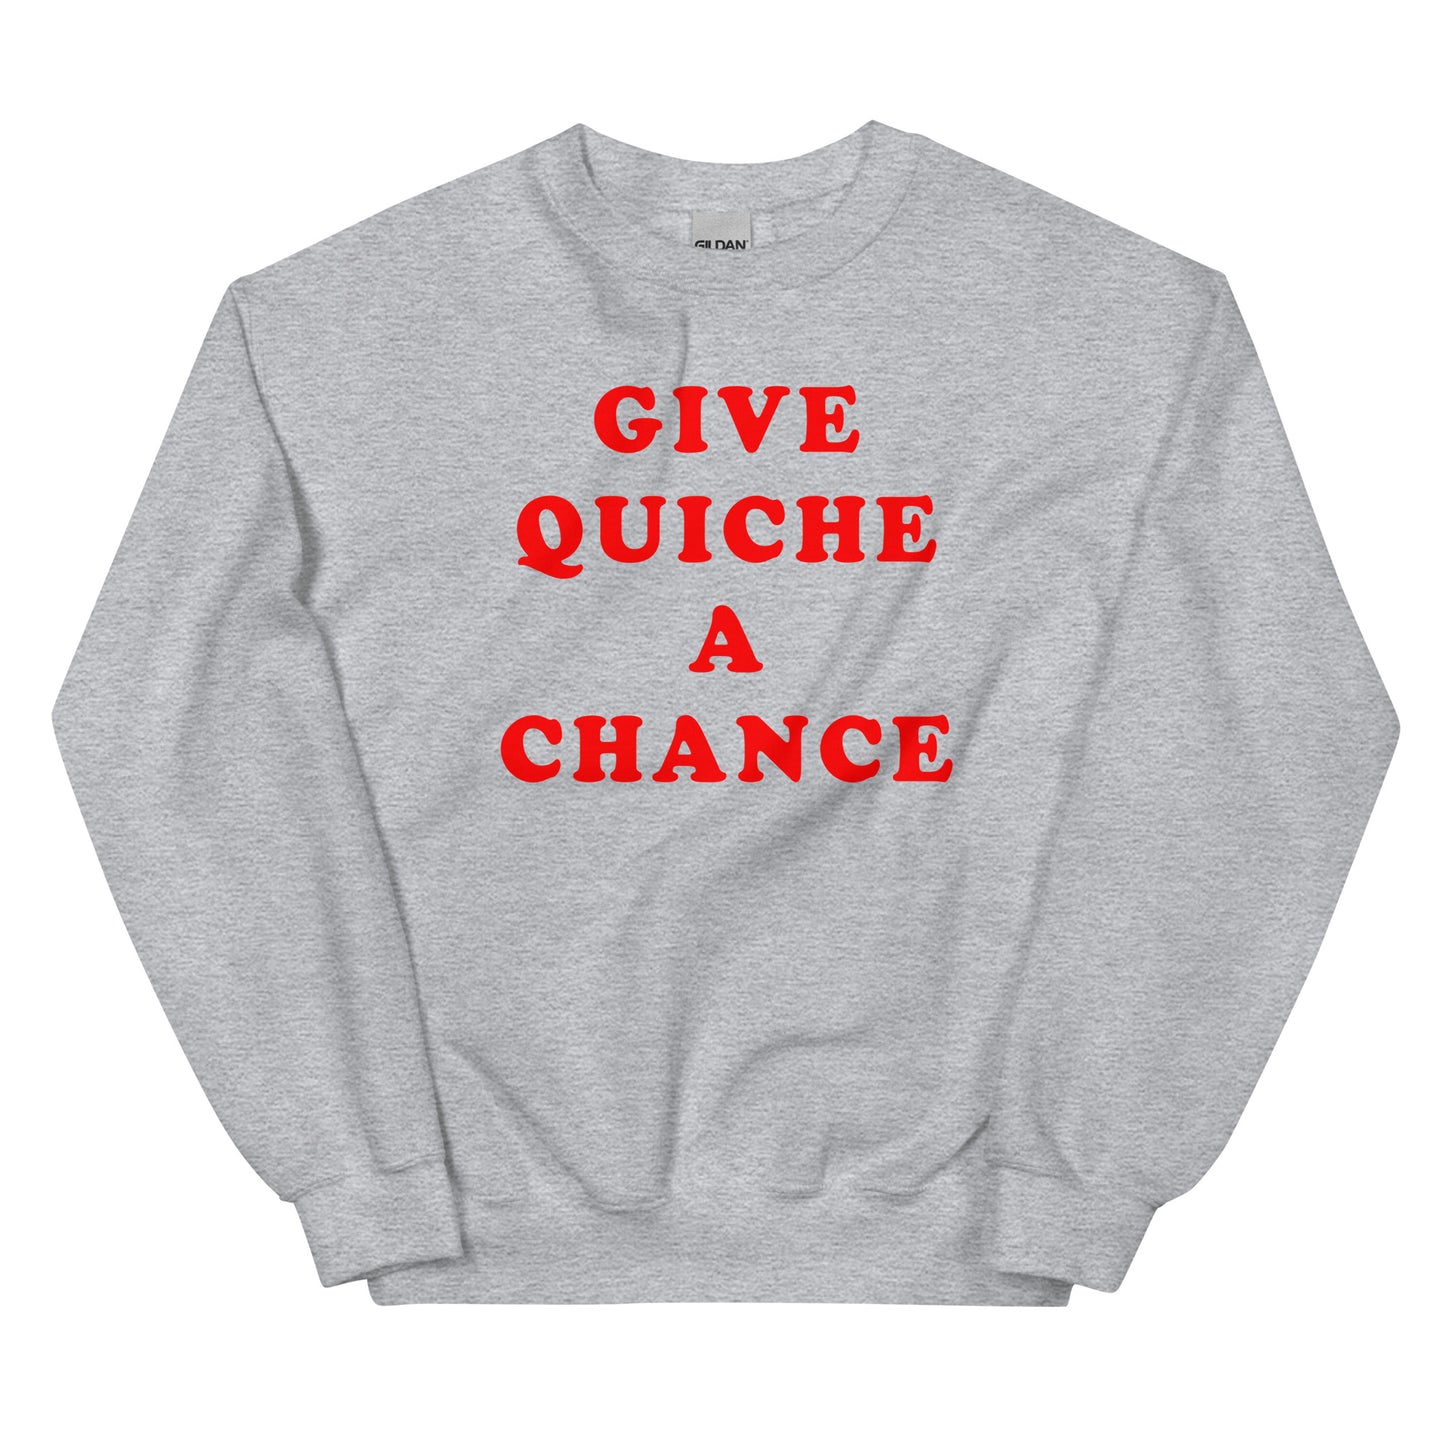 Give Quiche A Chance Comedy Quote Sweatshirt